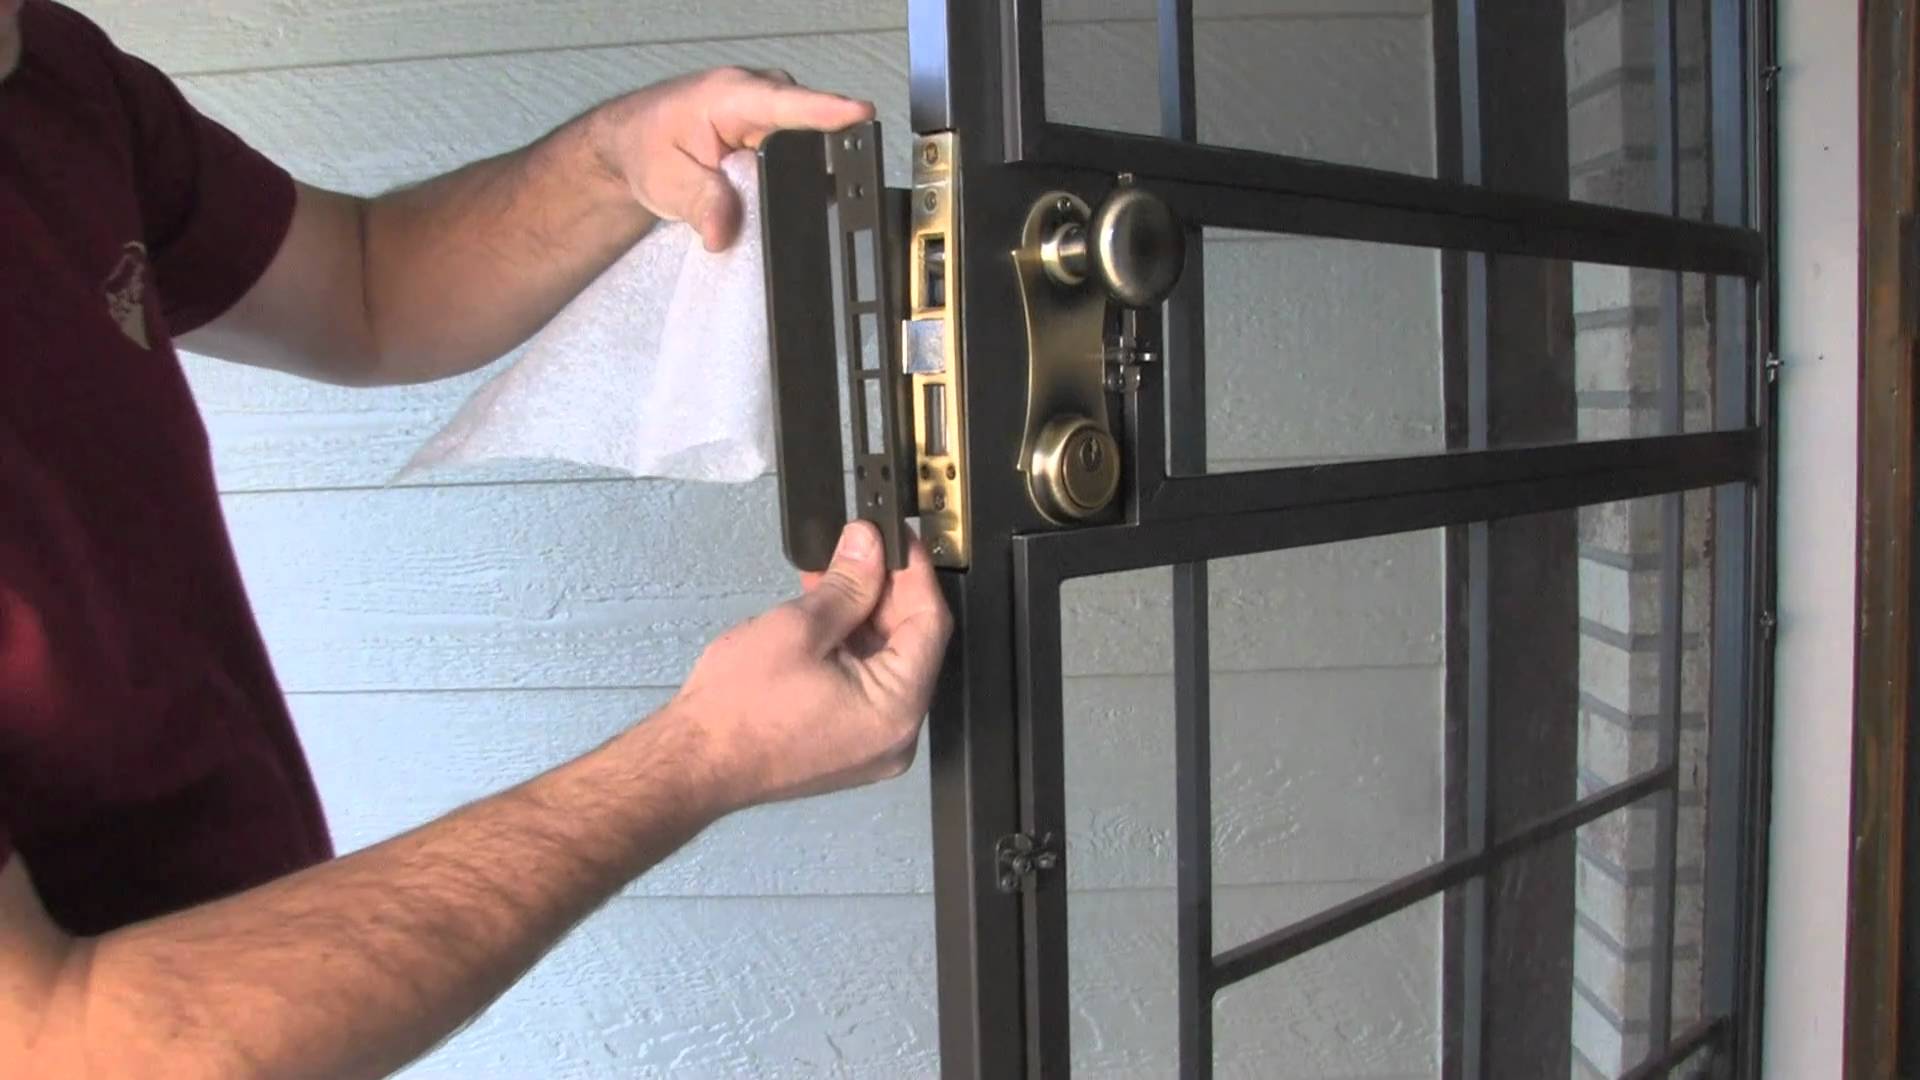 Quick Tips for Security: Doors, Windows and Locks